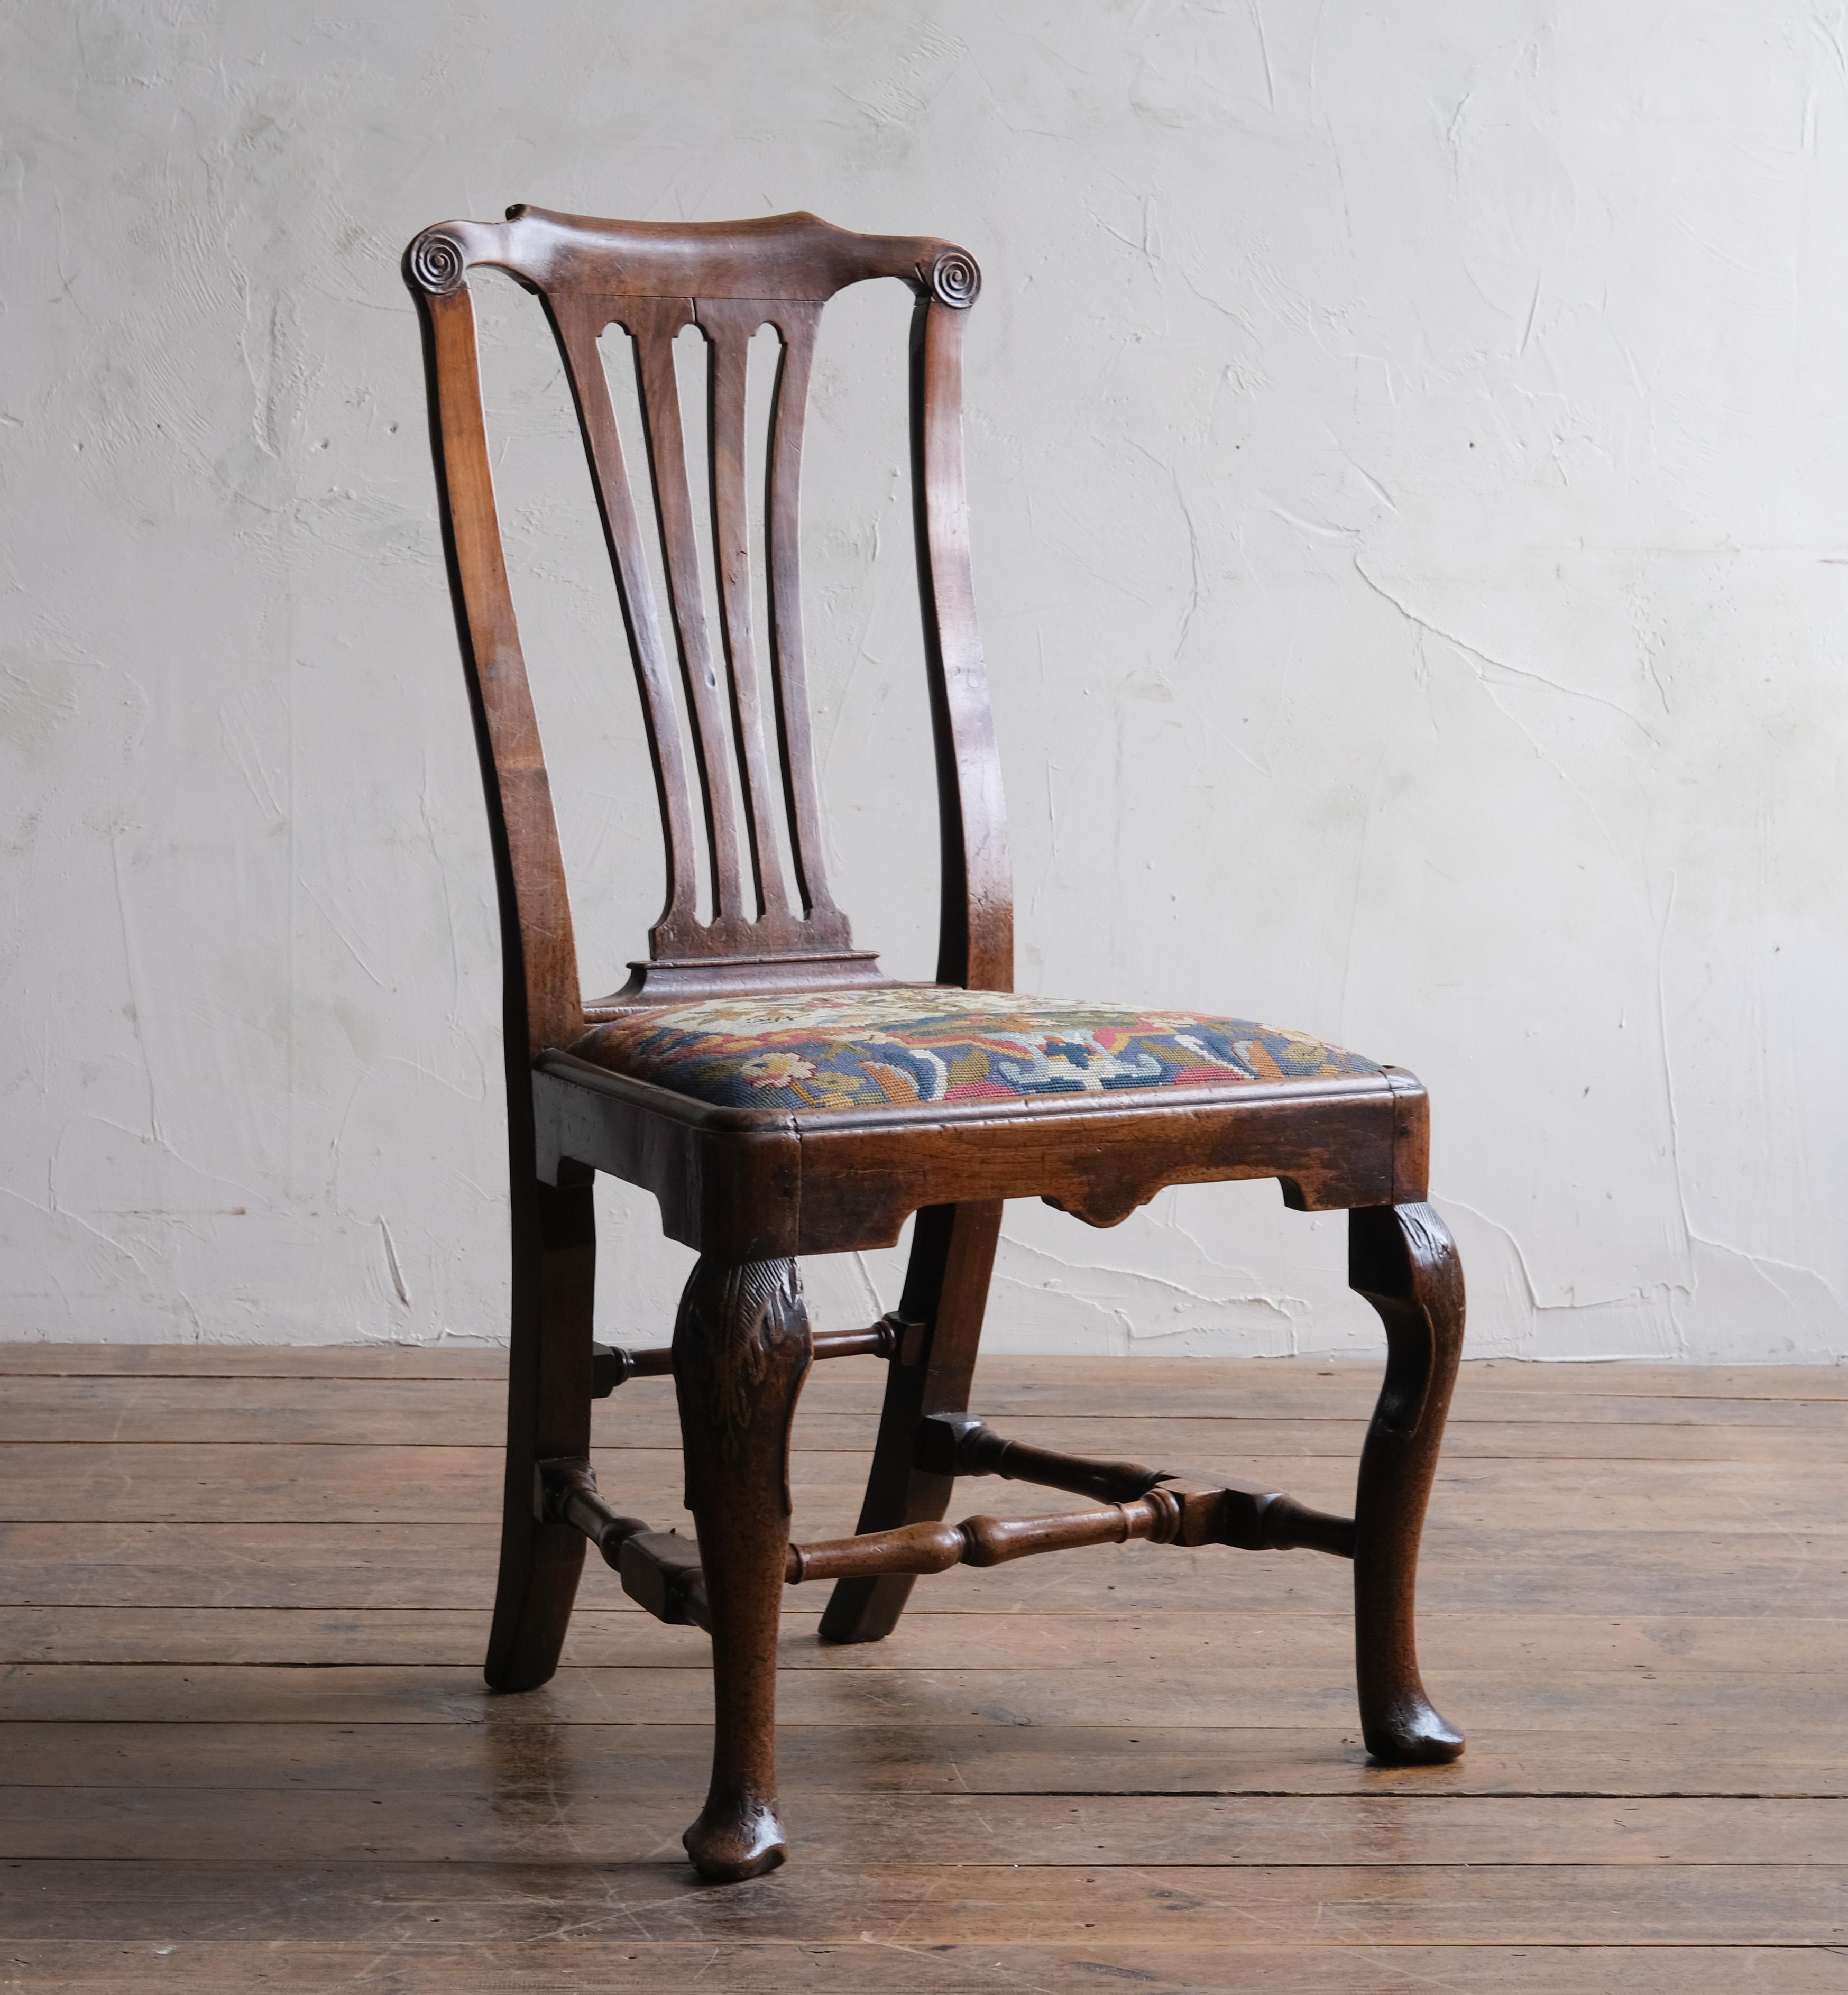 A walnut chair with carved cabriolet legs Joined with turned H stretcher and back rail, A needlework removable upholstered seat pad. Scroll top rail with pierced back splat. A nice mellow brown colour. English 1730. 

In structural sound